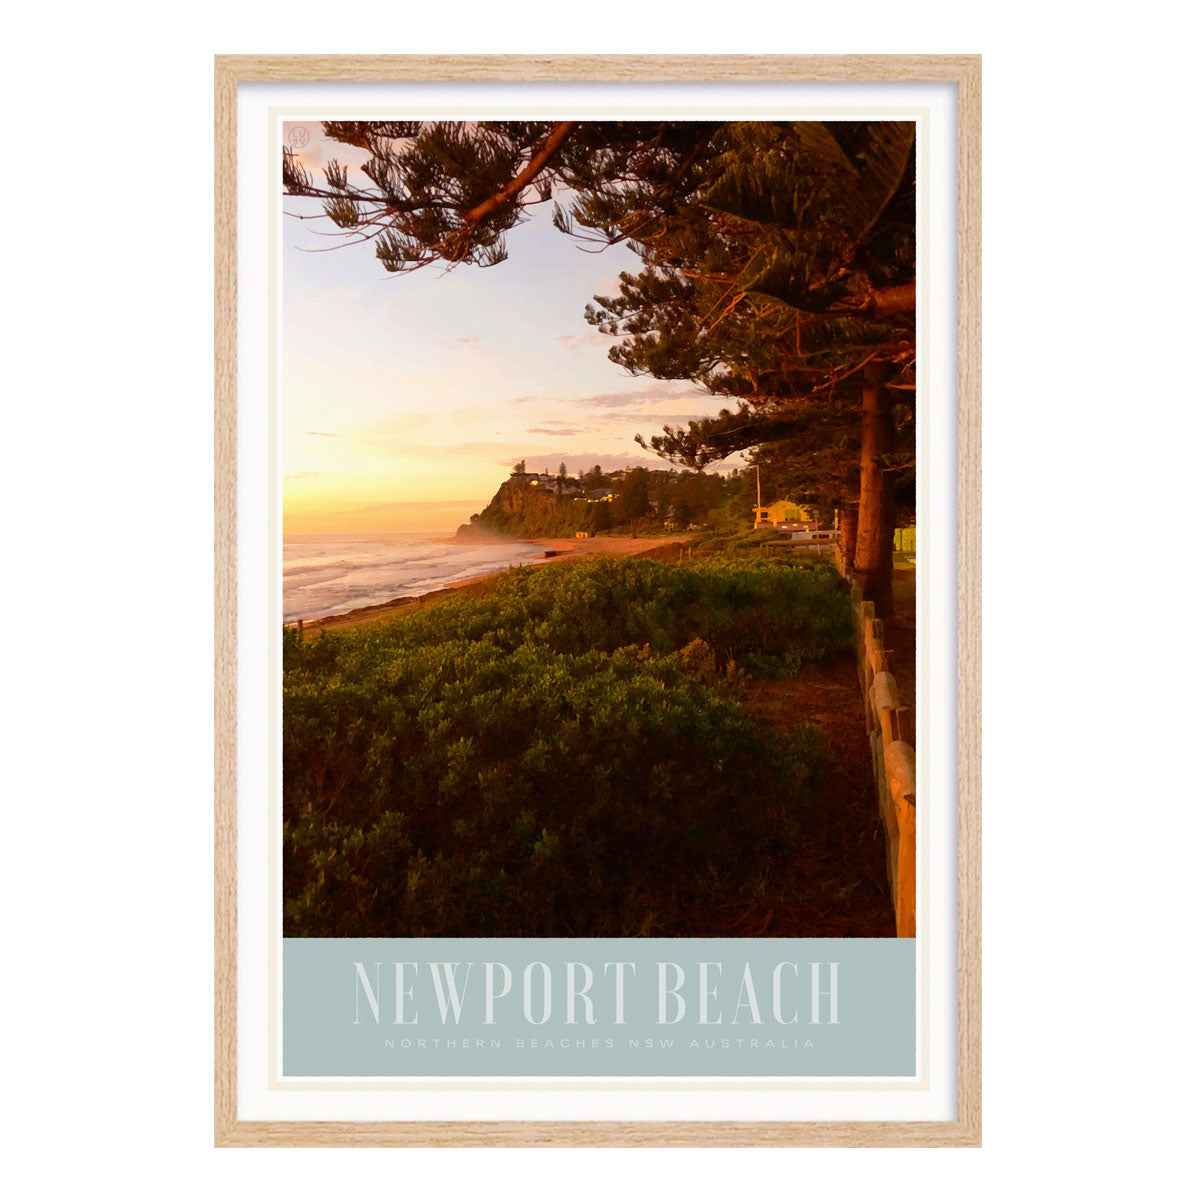 Newport beach retro vintage poster print in oak frame from places we luv